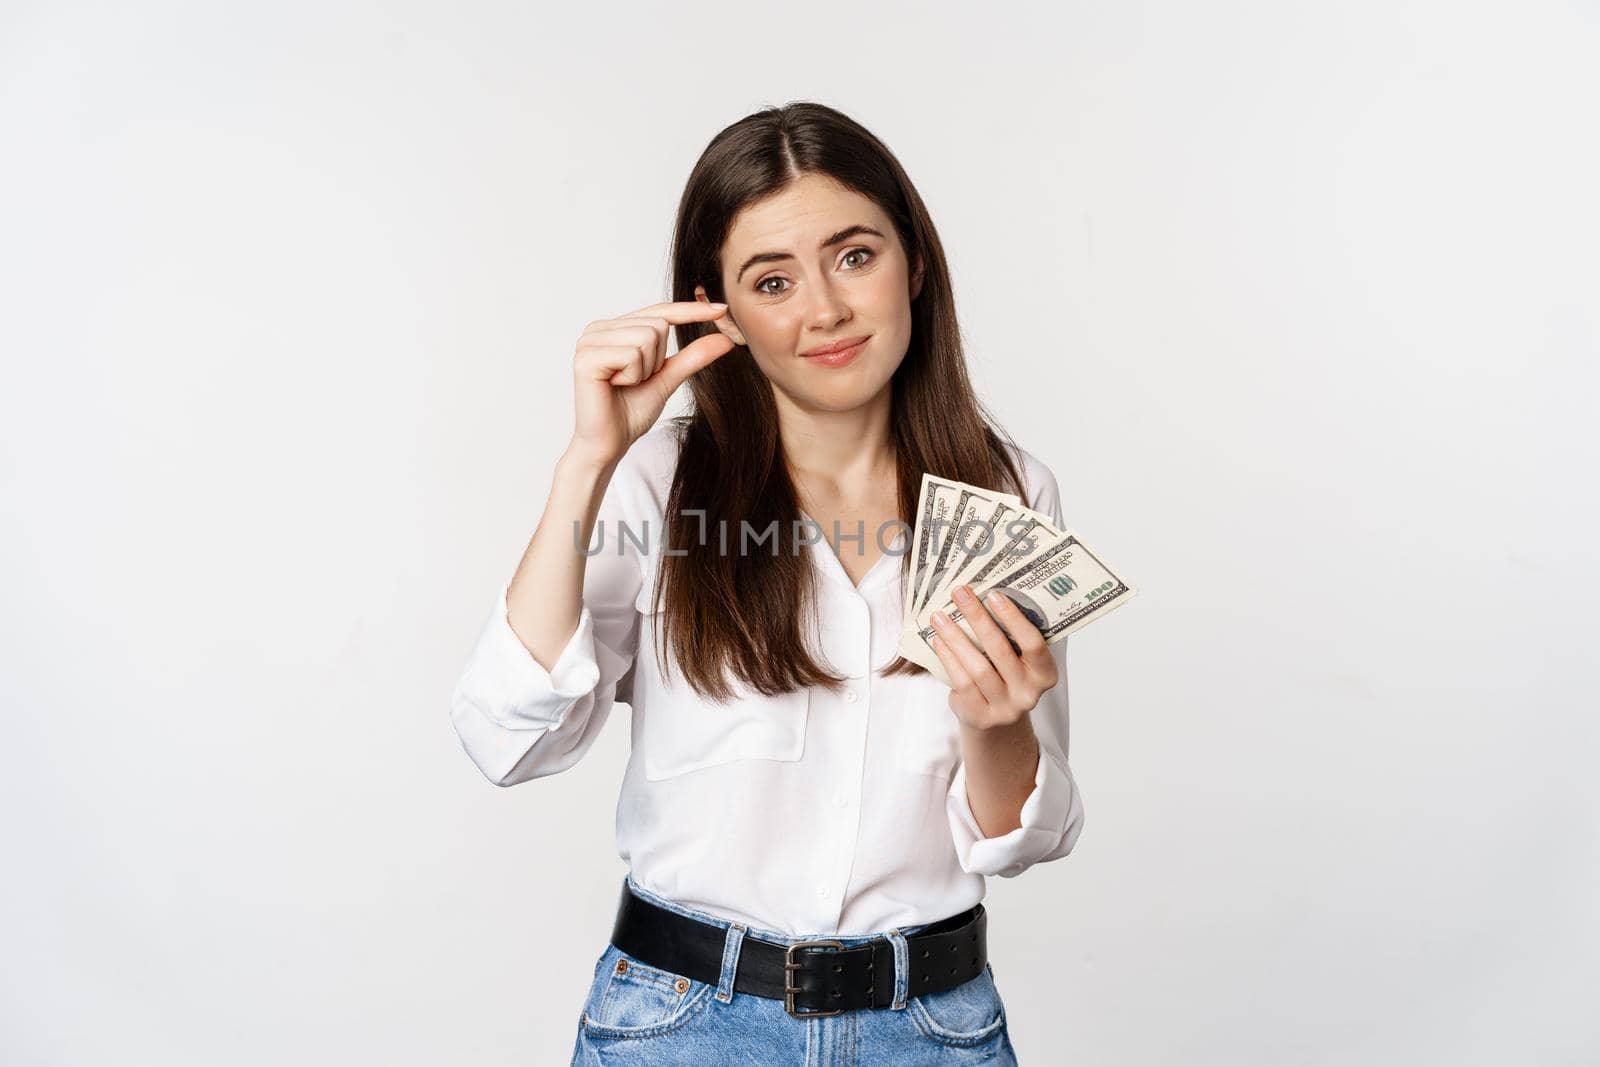 Sad girl pinching fingers and holding money, disappointed in amount of cash, lacking income, standing over white background.